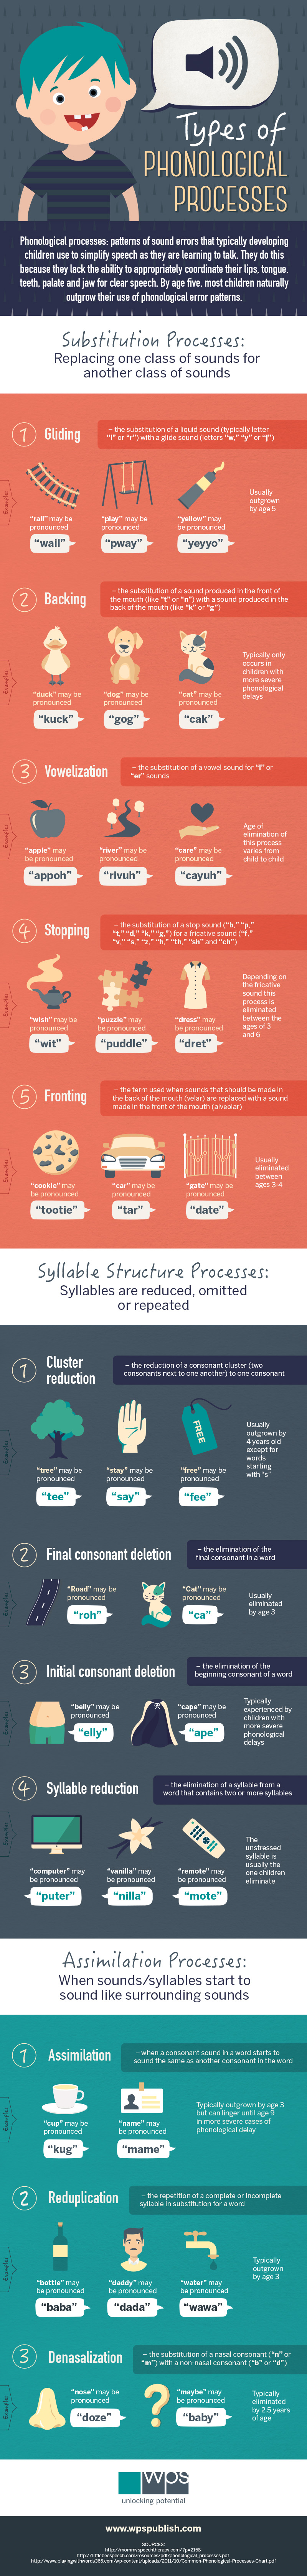 Types of Phonological Processes2